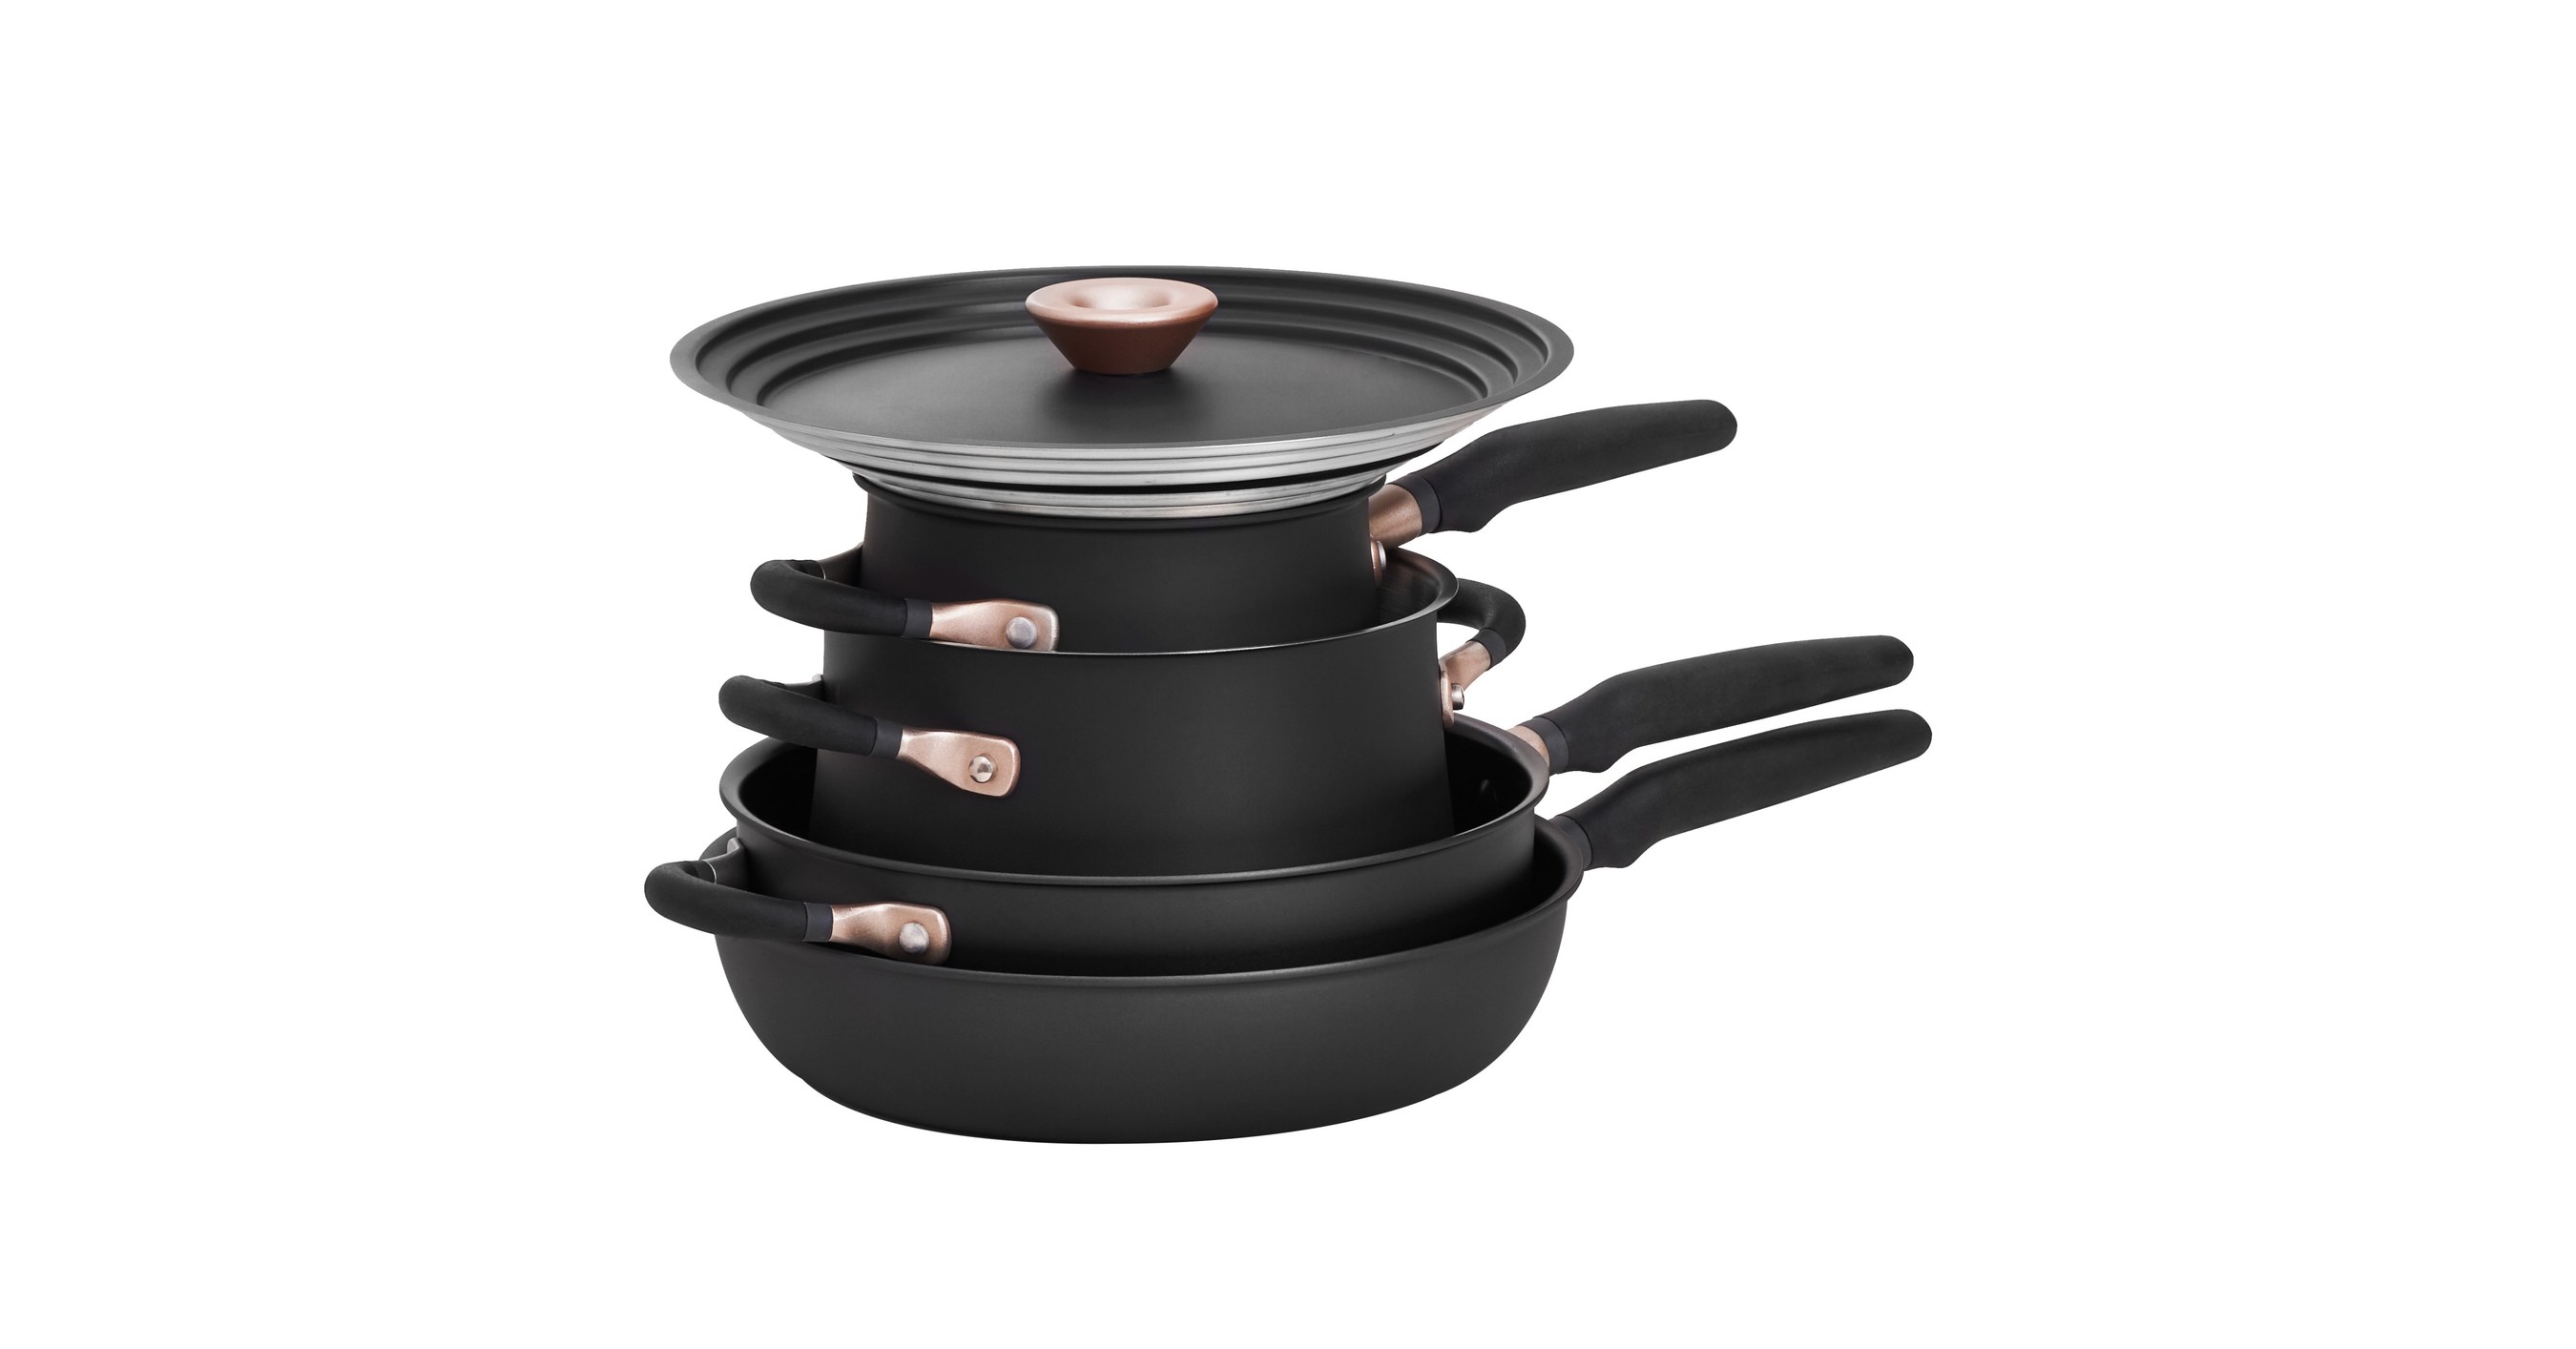 Meyer Accent Series 6pc Nonstick Stainless Steel Induction